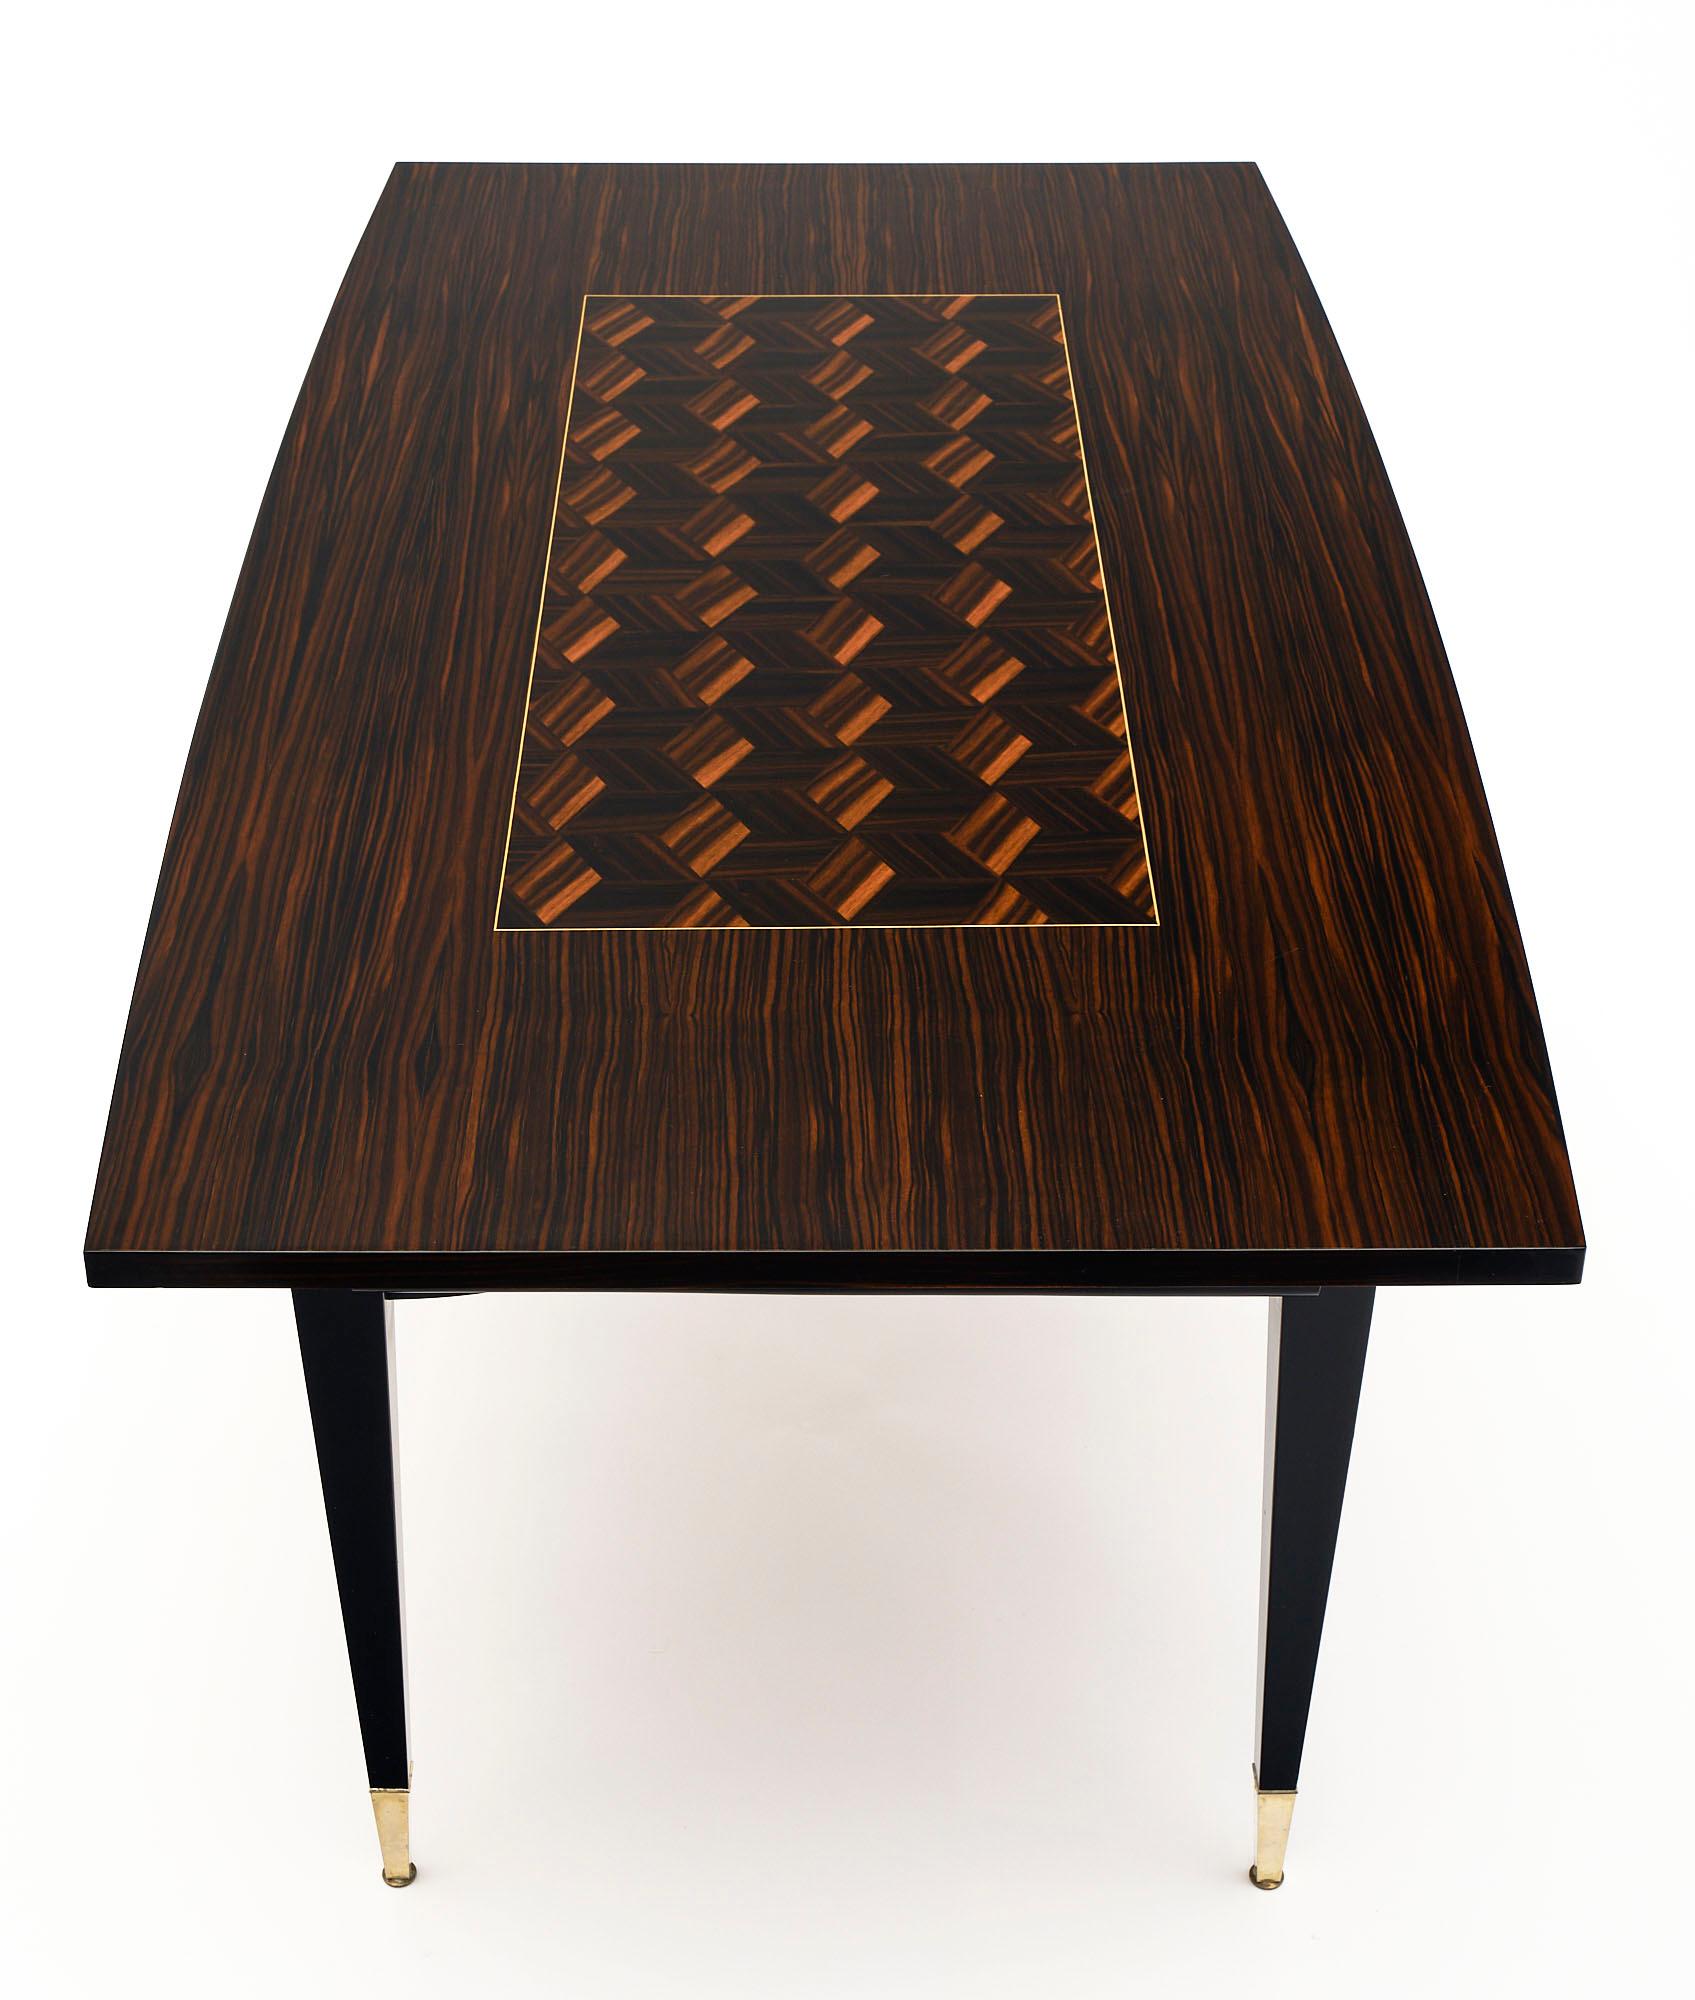 French dining table made of Macassar of ebony wood veneer with a beautiful parquetry design. It is supported by tapered legs capped in brass. Each side has pulls that enable a leaf to be added to extend the surface area. Each adds an additional